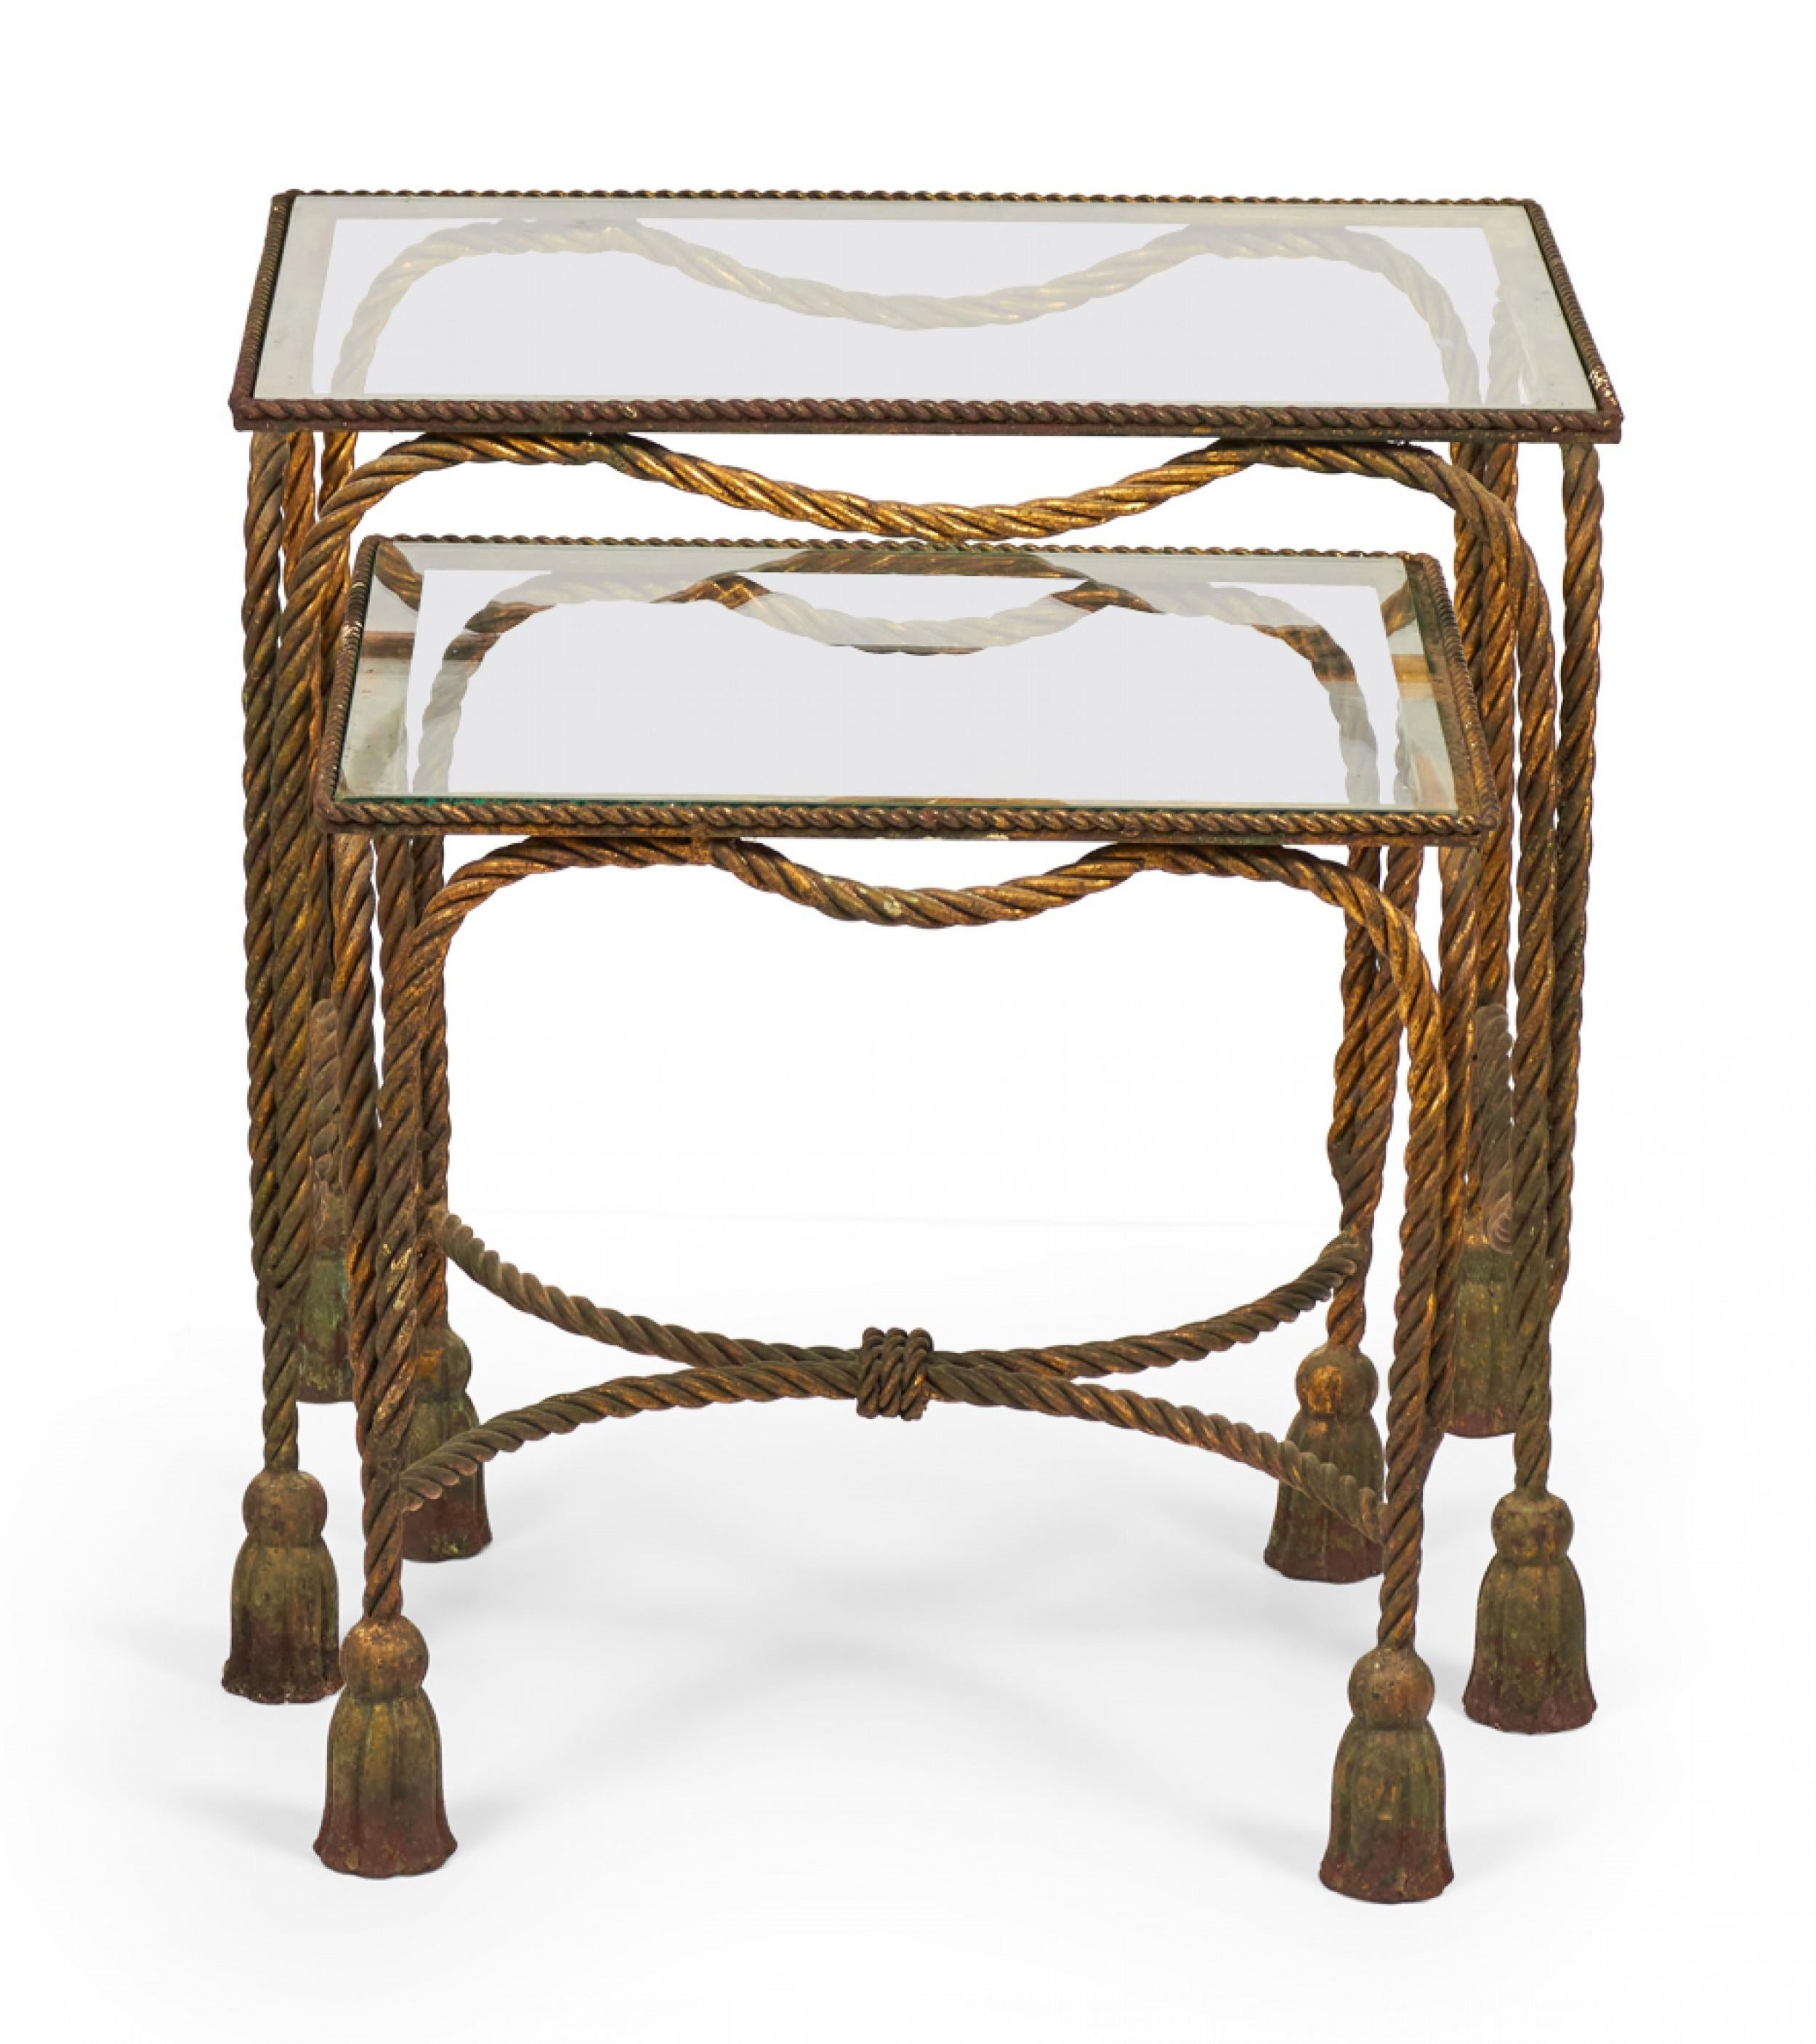 Palladio Italy Baroque Style Rope and Tassel Gilt Iron Nesting Tables For Sale 3